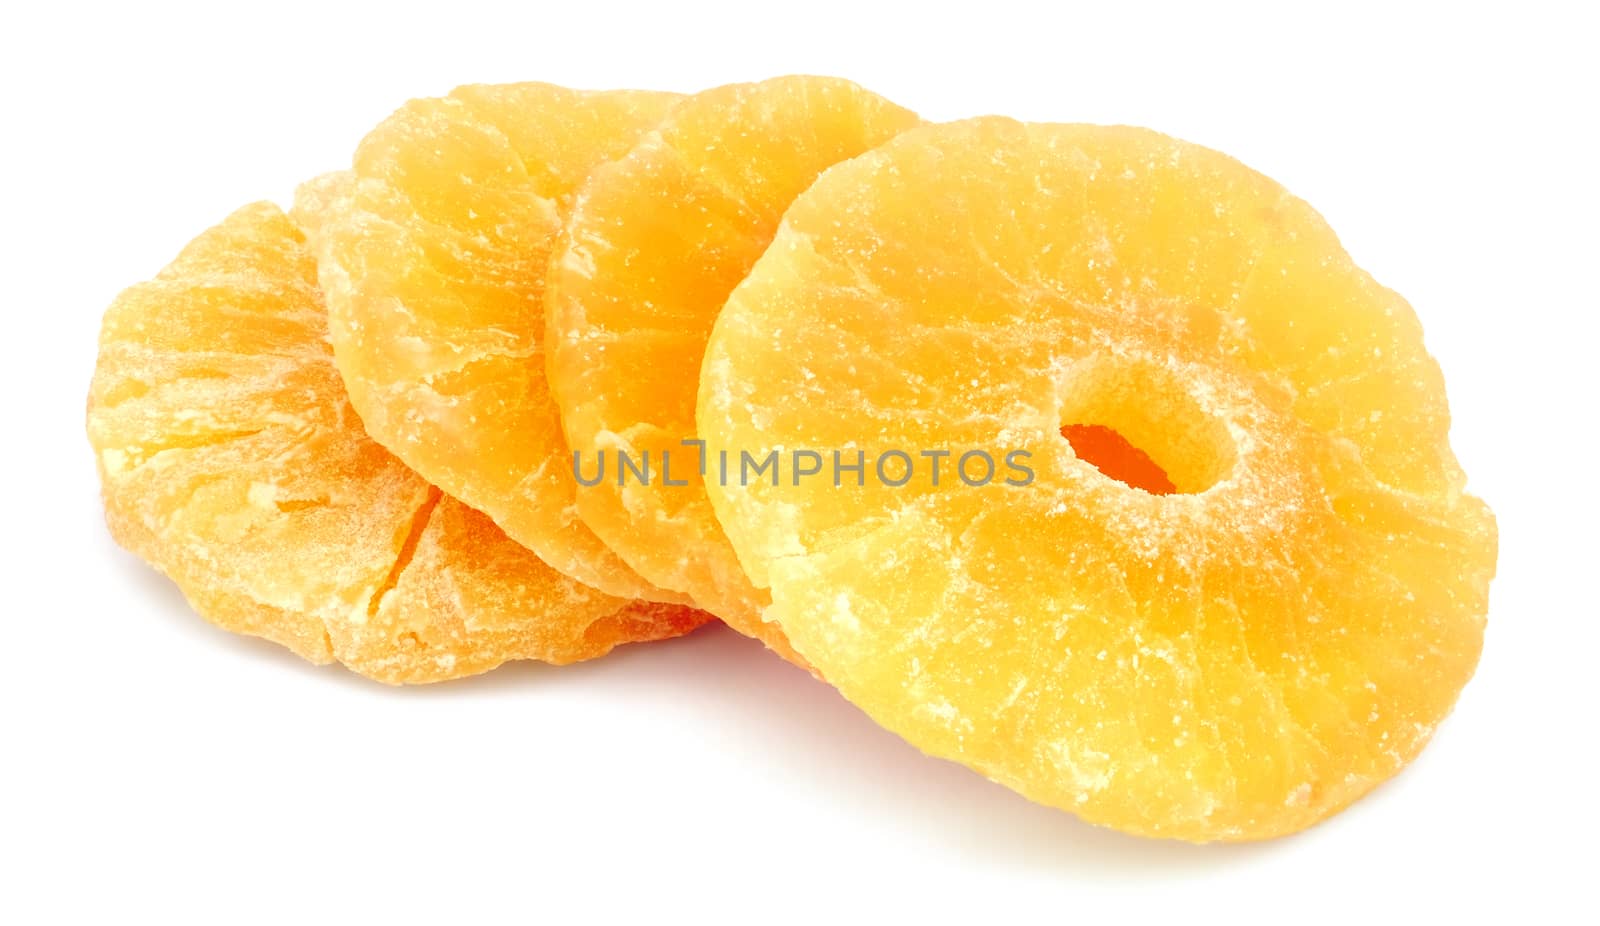 Candied pineapple rings by leventina